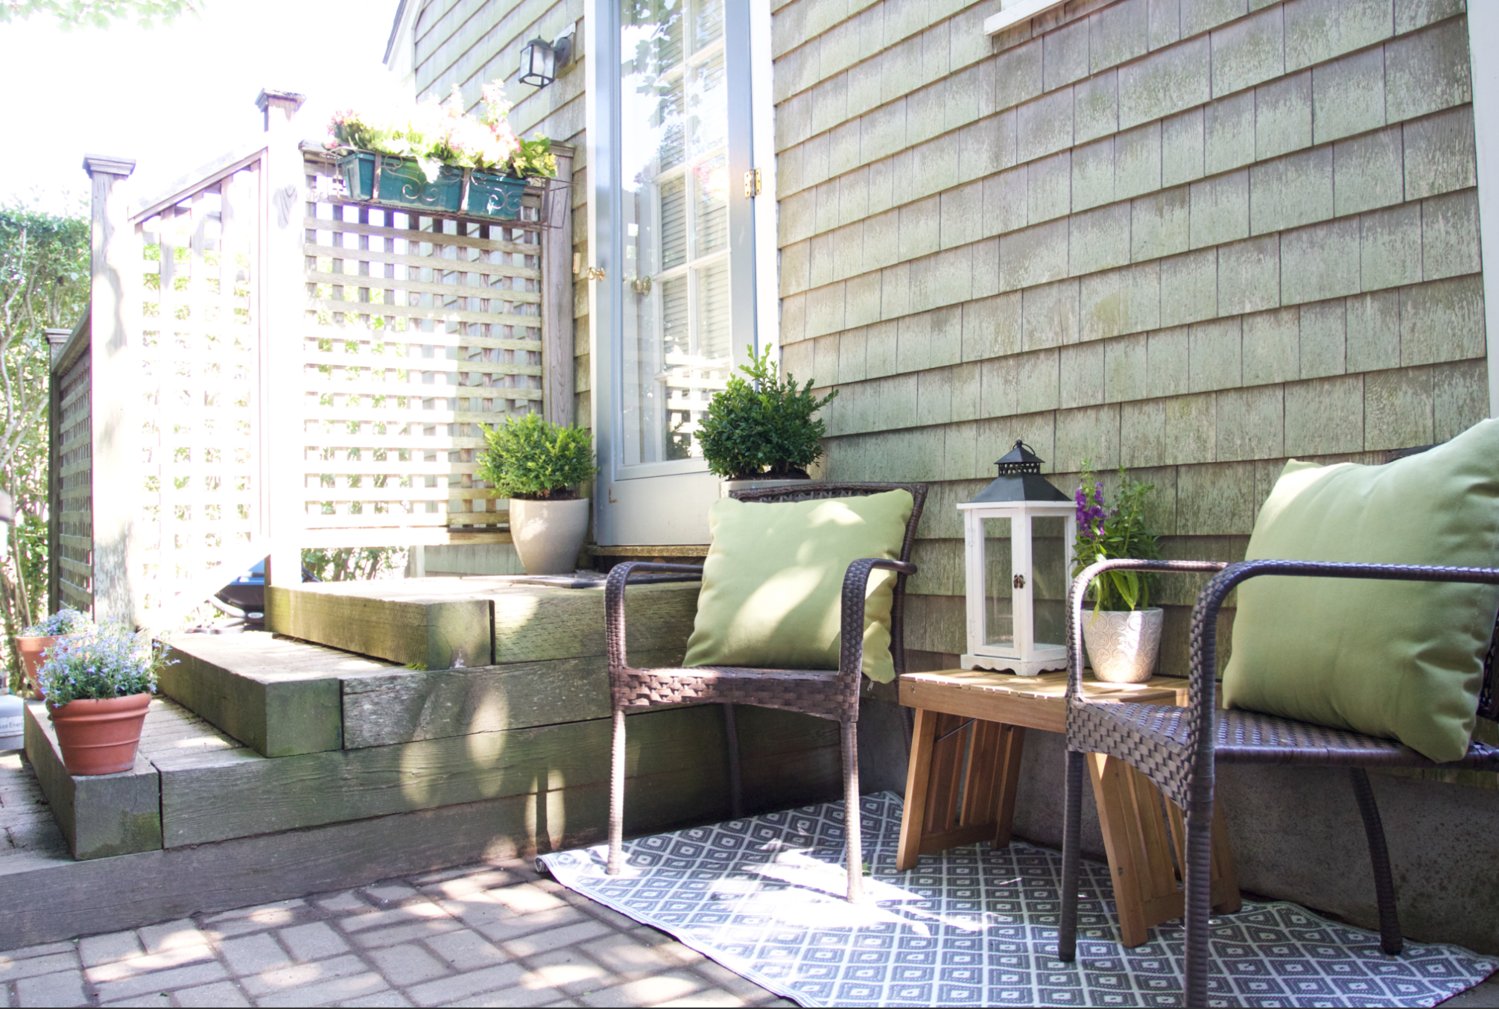 The brick patio is perfect for relaxing and entertaining.